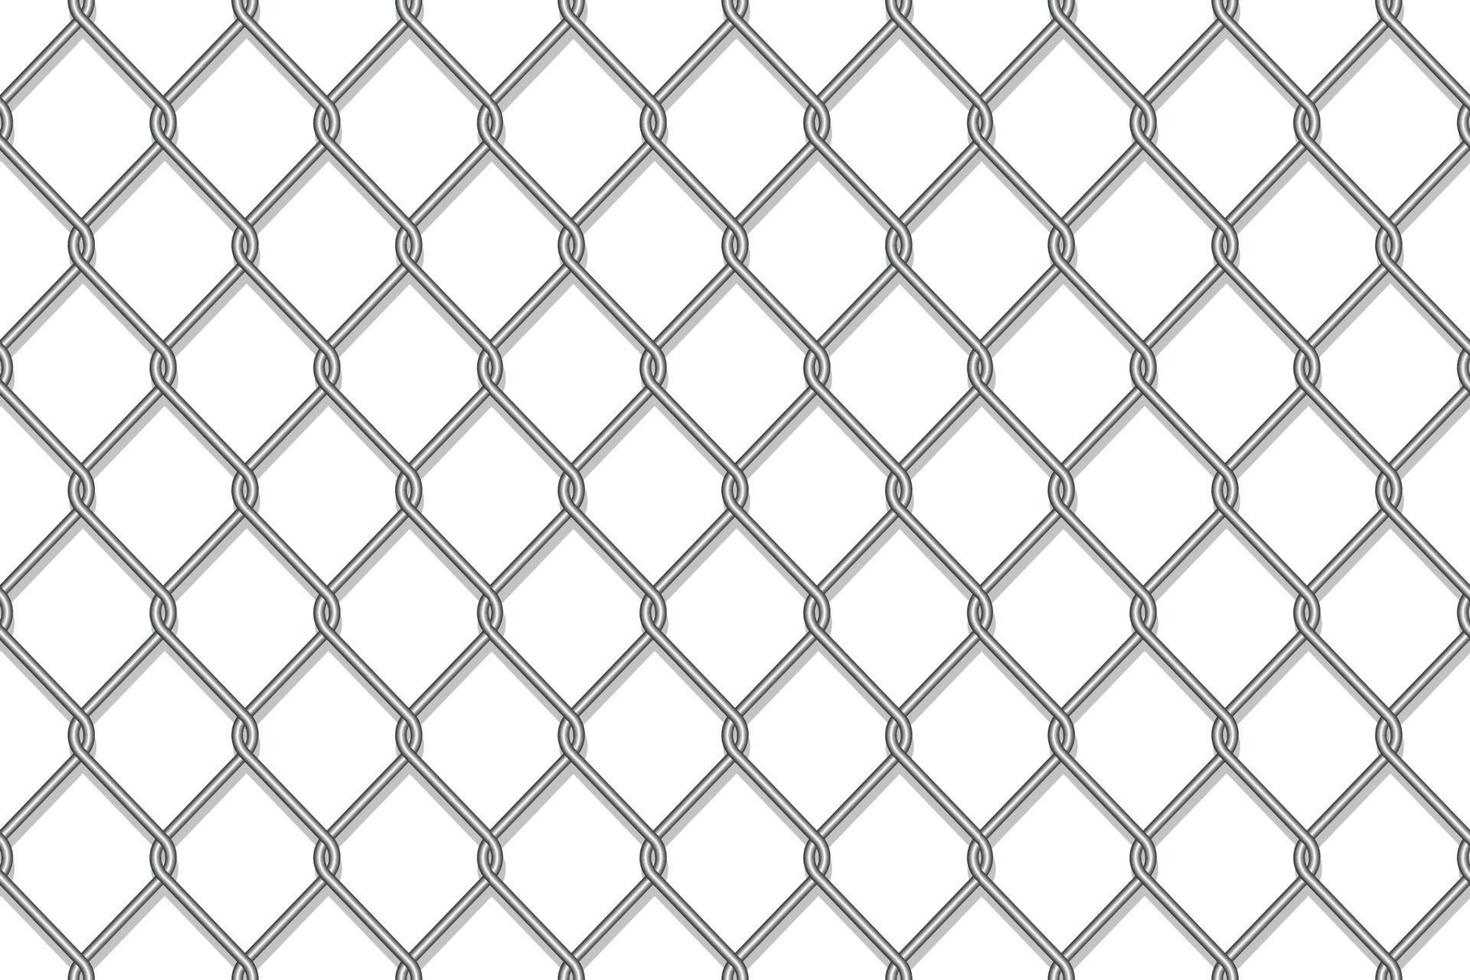 Realistic metal chain link fence vector